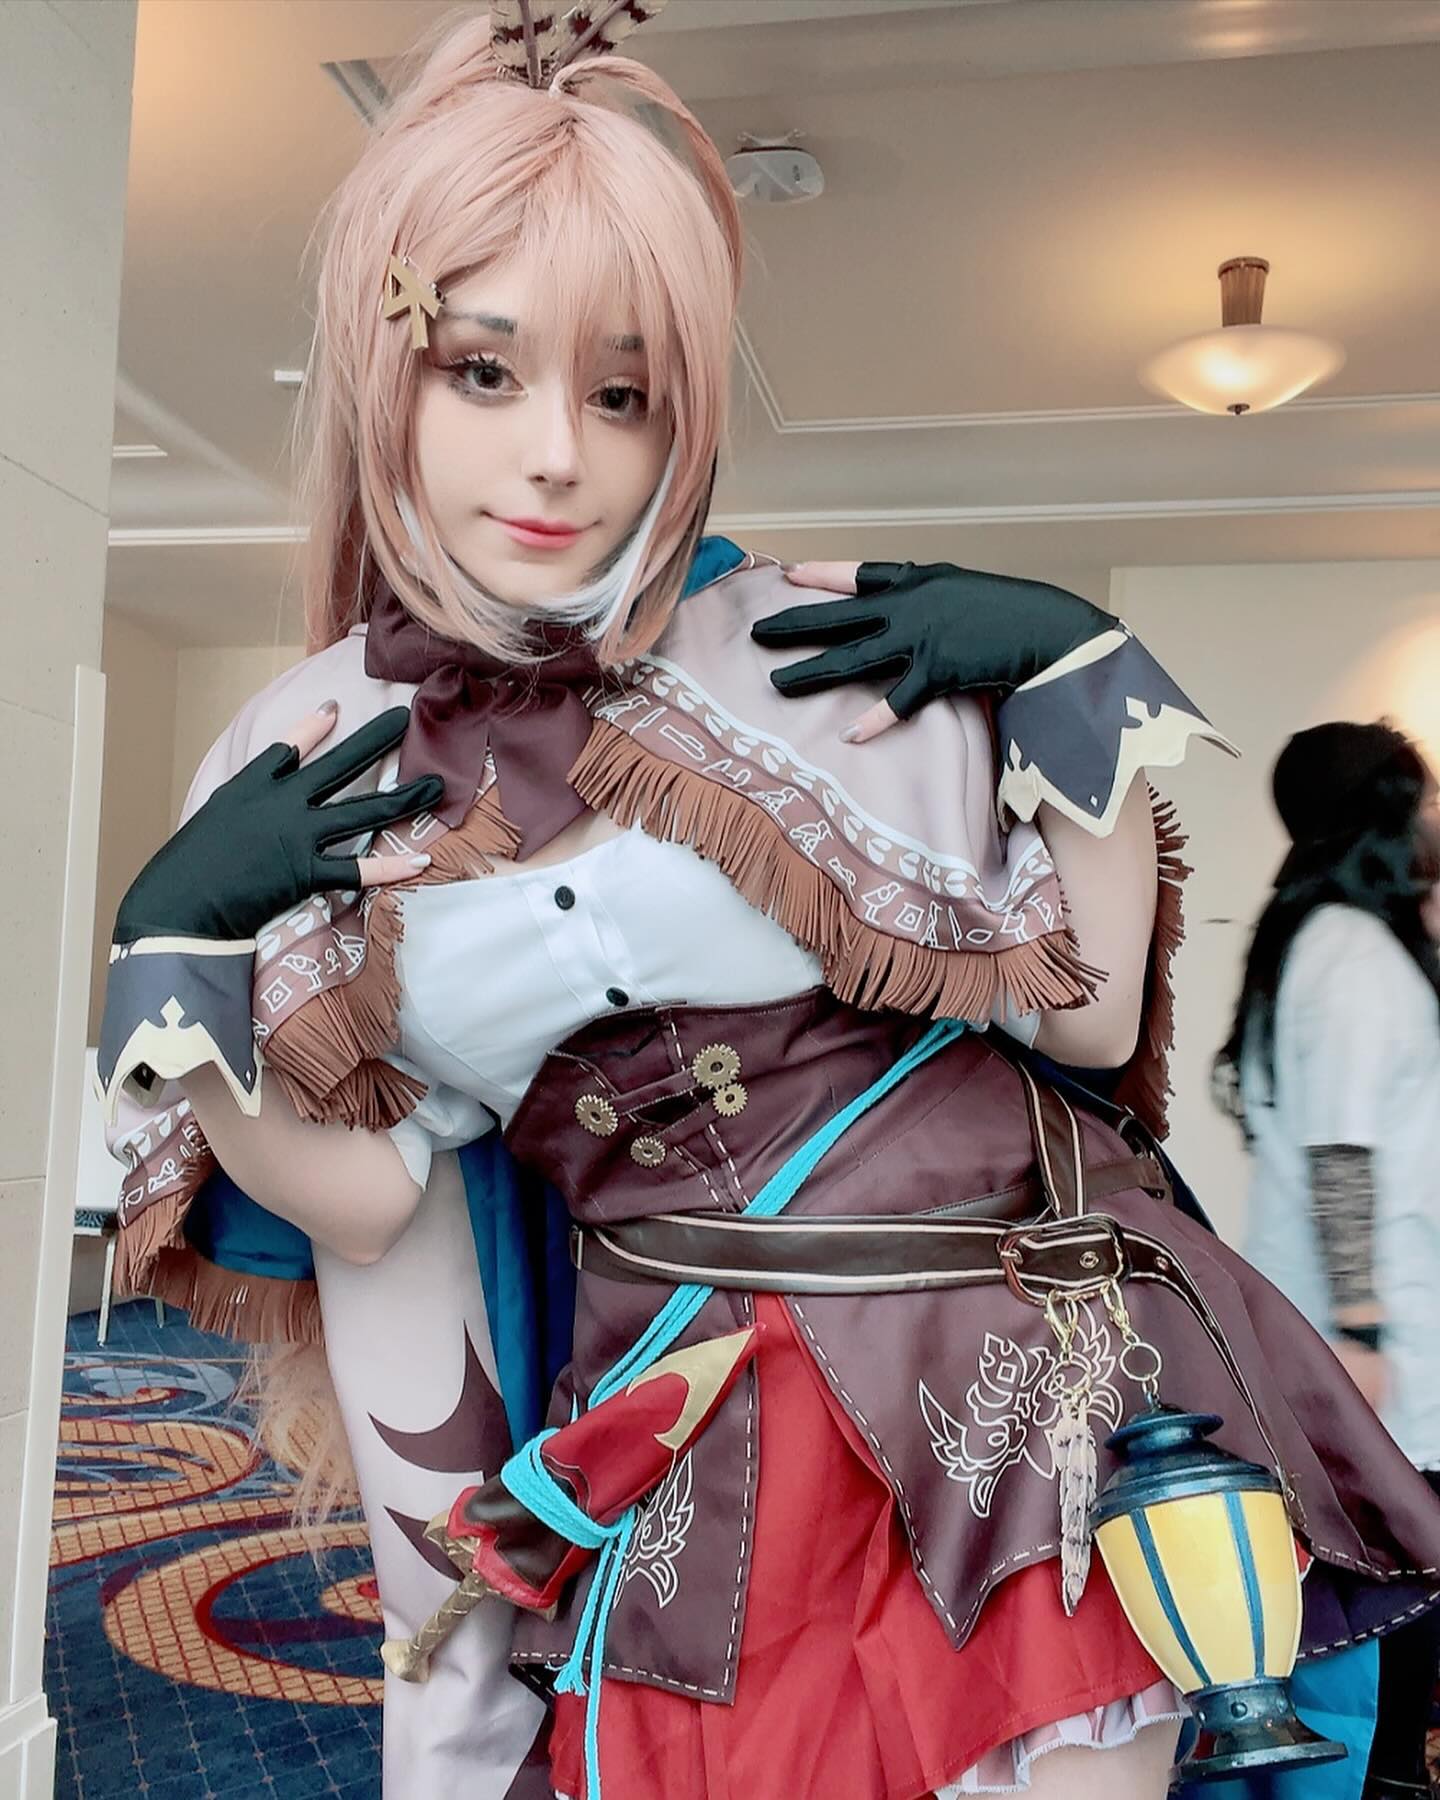 Vtuber supremacy! I am birb now. I’m so happy with how my Nanashi Mumei cosplay turned out! And now that Katsucon is finally over I feel so motivated and energized to make content!  #katsucon #cosplaygirl #vtubers #hololive #cosplay